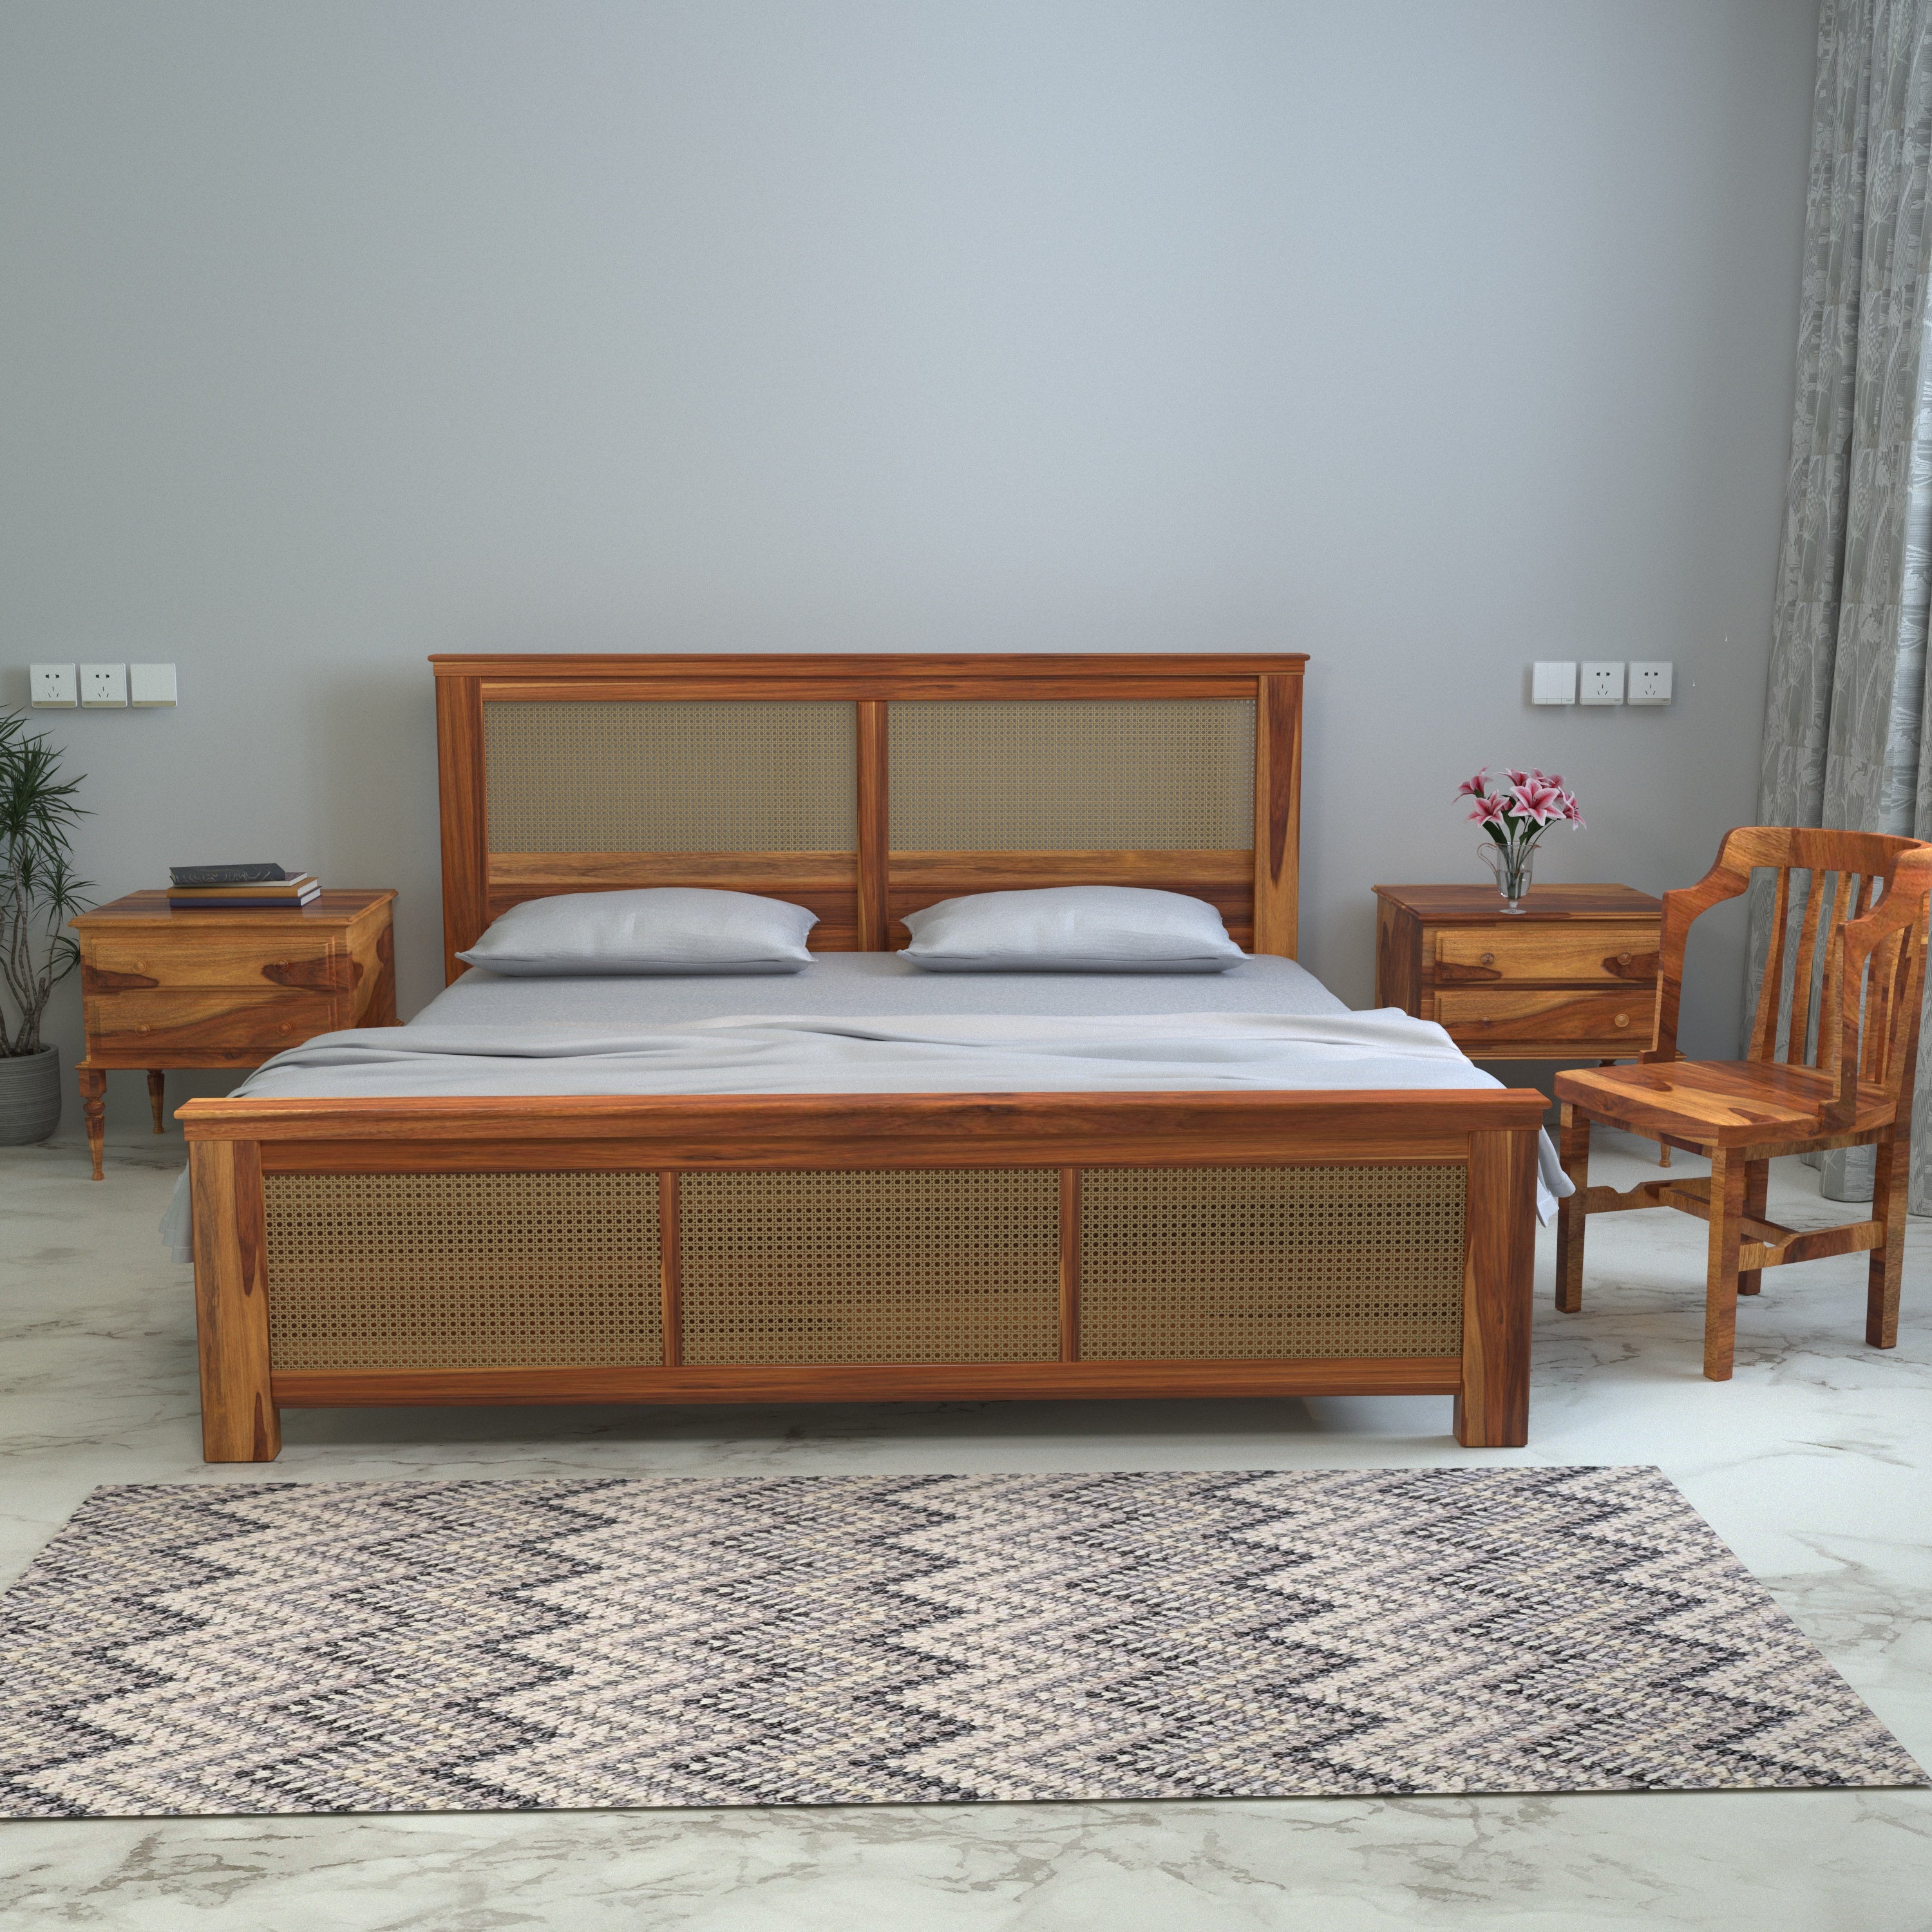 Vintage Simple Wooden Bed with Handmade Glorious Chair and Bedside Bedroom Furniture Sets